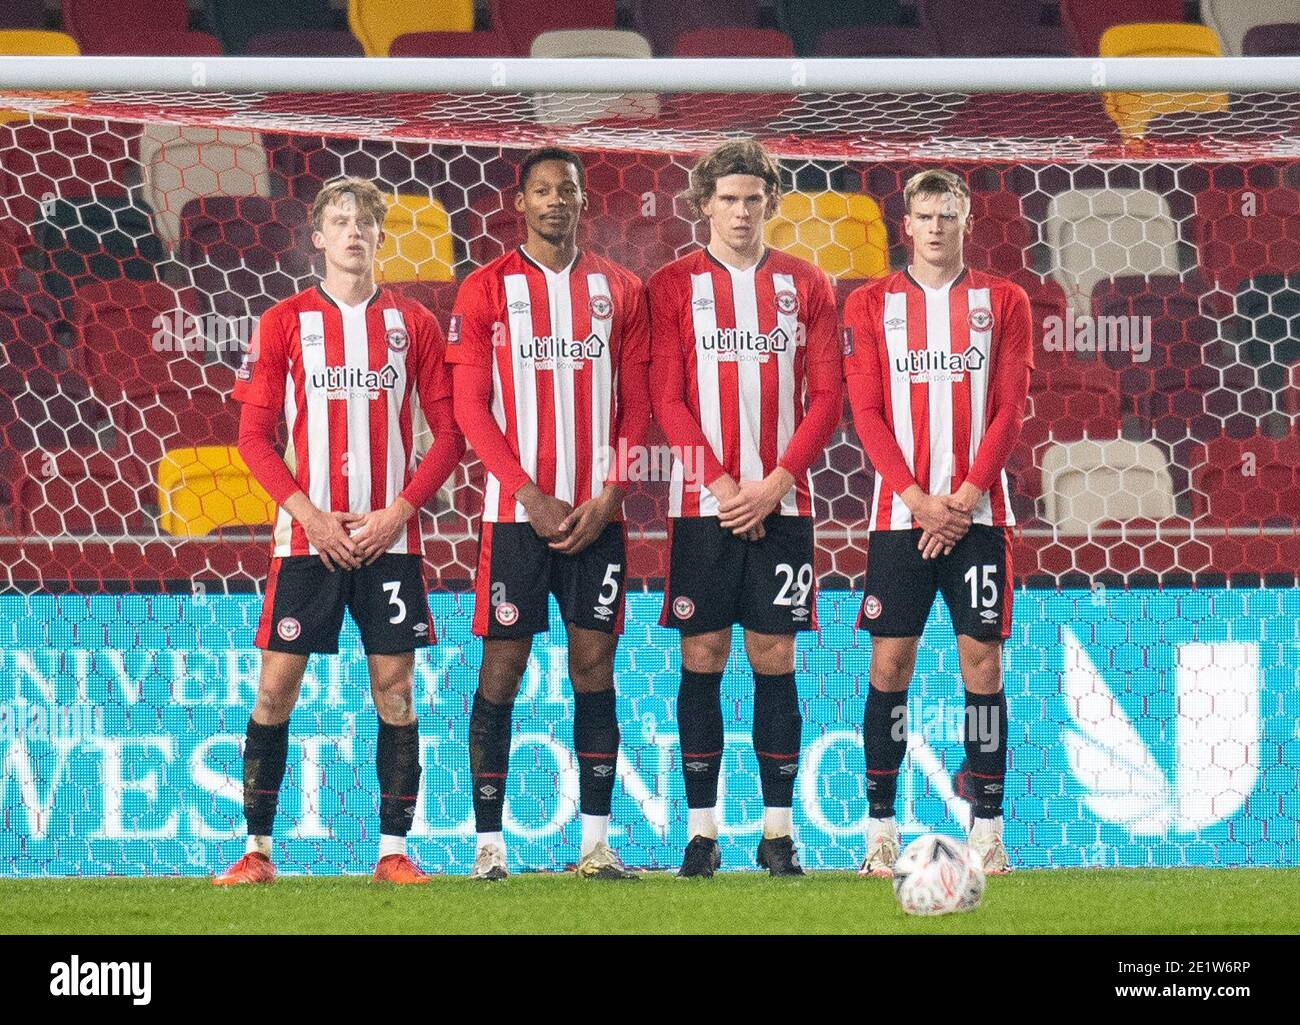 Brentford, UK. 09th Jan, 2021. Brentford wall from L to R: Mads Roerslev Rasmussen; Ethan Pinnock; Mads Bech Sorensen and Brentford Marcus Forss during the FA Cup 3rd round behind closed doors match between Brentford and Middlesbrough at the Brentford Community Stadium, Brentford, England on 9 January 2021. Photo by Andrew Aleksiejczuk/PRiME Media Images. Credit: PRiME Media Images/Alamy Live News Stock Photo